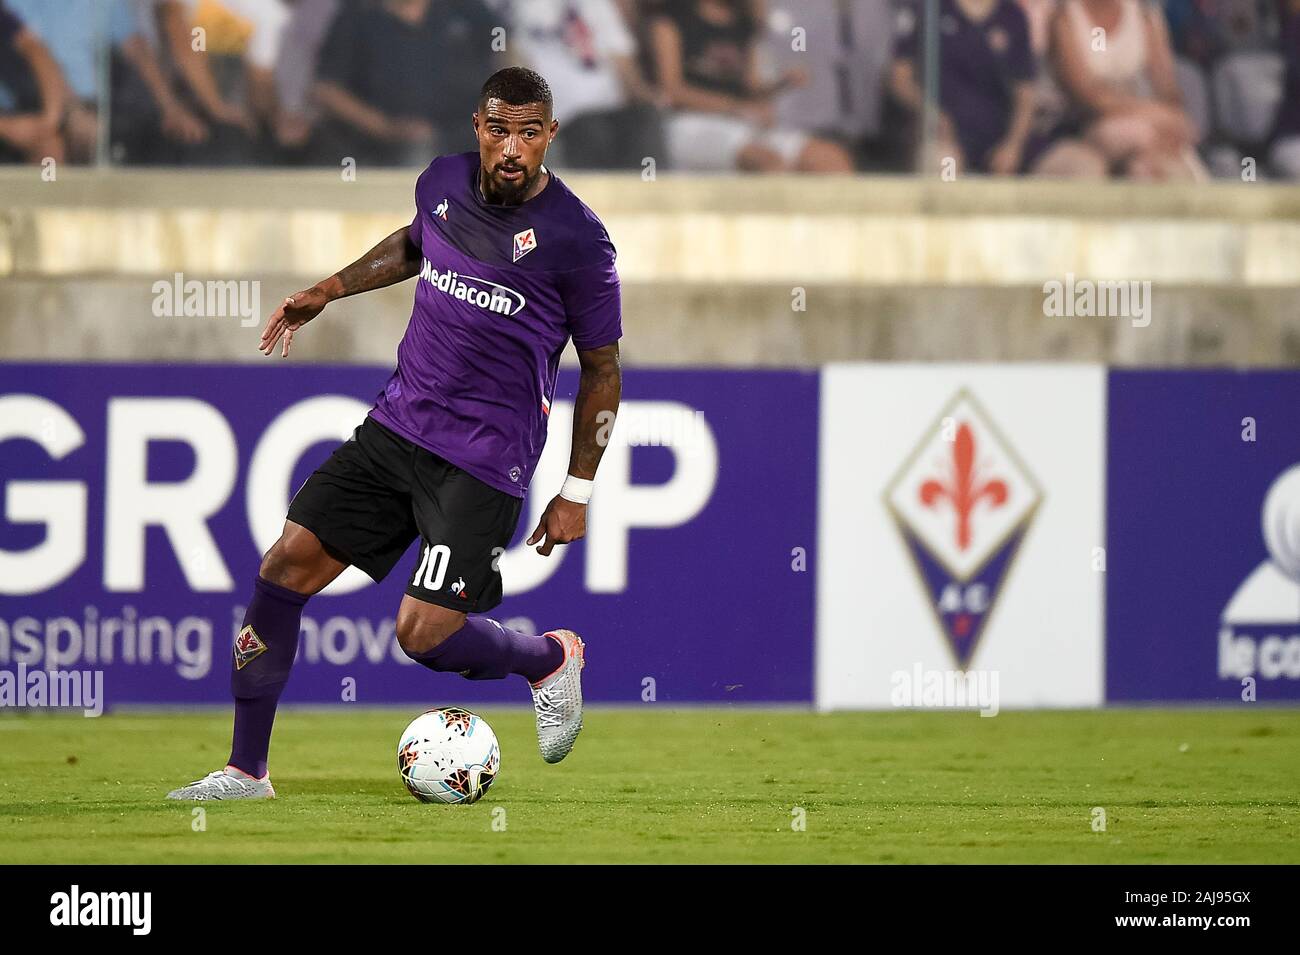 Florence, Italy. 11 August, 2019: Kevin-Prince Boateng of ACF Fiorentina in action during the pre-season friendly football match between ACF Fiorentina and Galatasaray SK. ACF Fiorentina won 4-1 over Galatasaray SK. Credit: Nicolò Campo/Alamy Live News Stock Photo